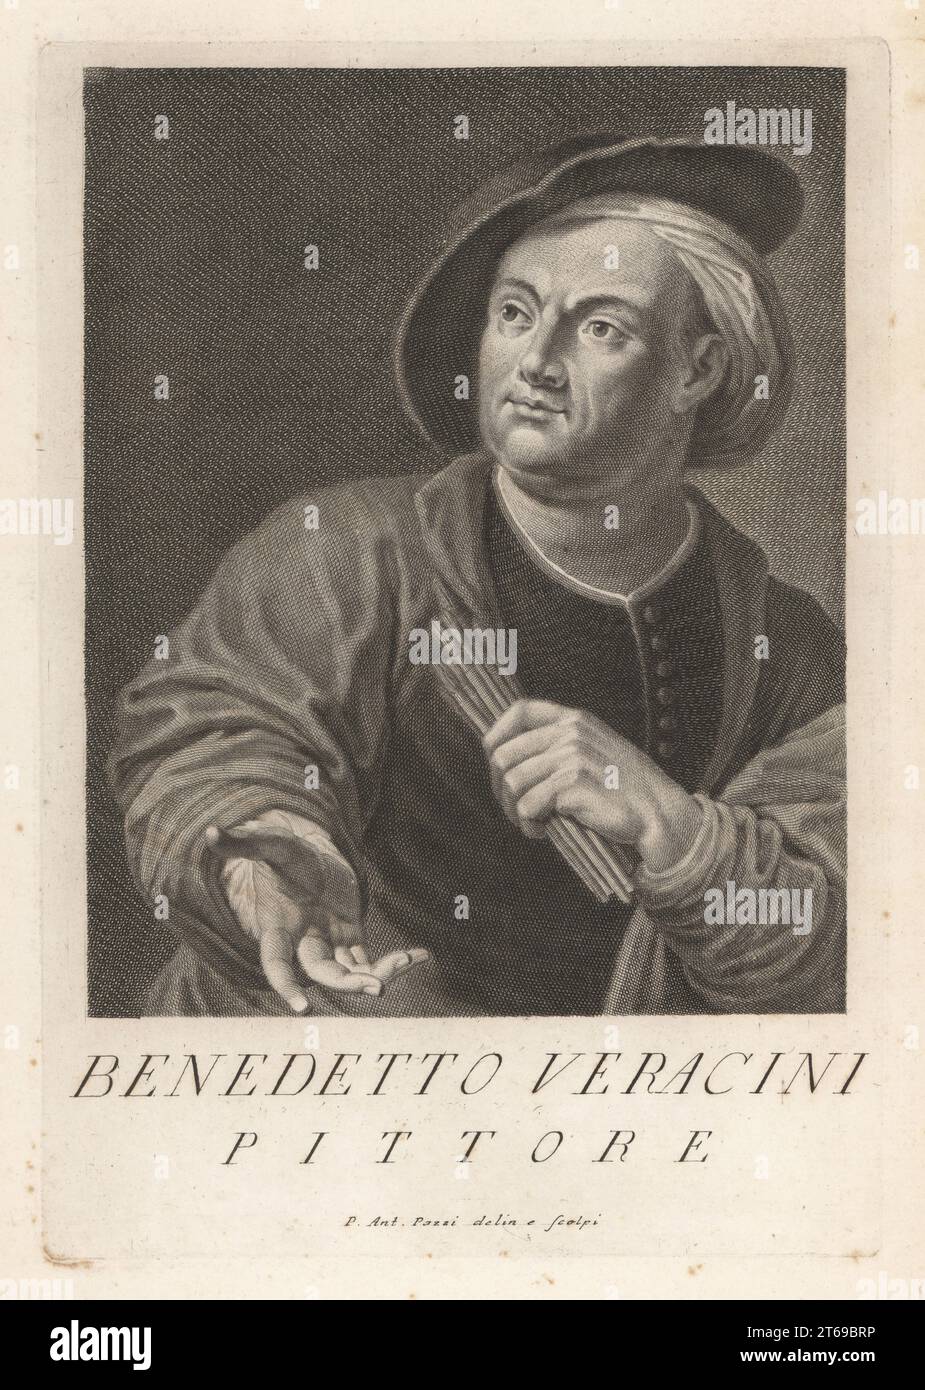 Benedetto Veracini, Italian painter and draughtsman, 1607-1690. Pittore. Copperplate engraving drawn and engraved by Pietro Antonio Pazzi after a self portrait by the artist from Francesco Moucke's Museo Florentino (Museum Florentinum), Serie di Ritratti de Pittori (Series of Portraits of Painters) stamperia Mouckiana, Florence, 1752-62. Stock Photo